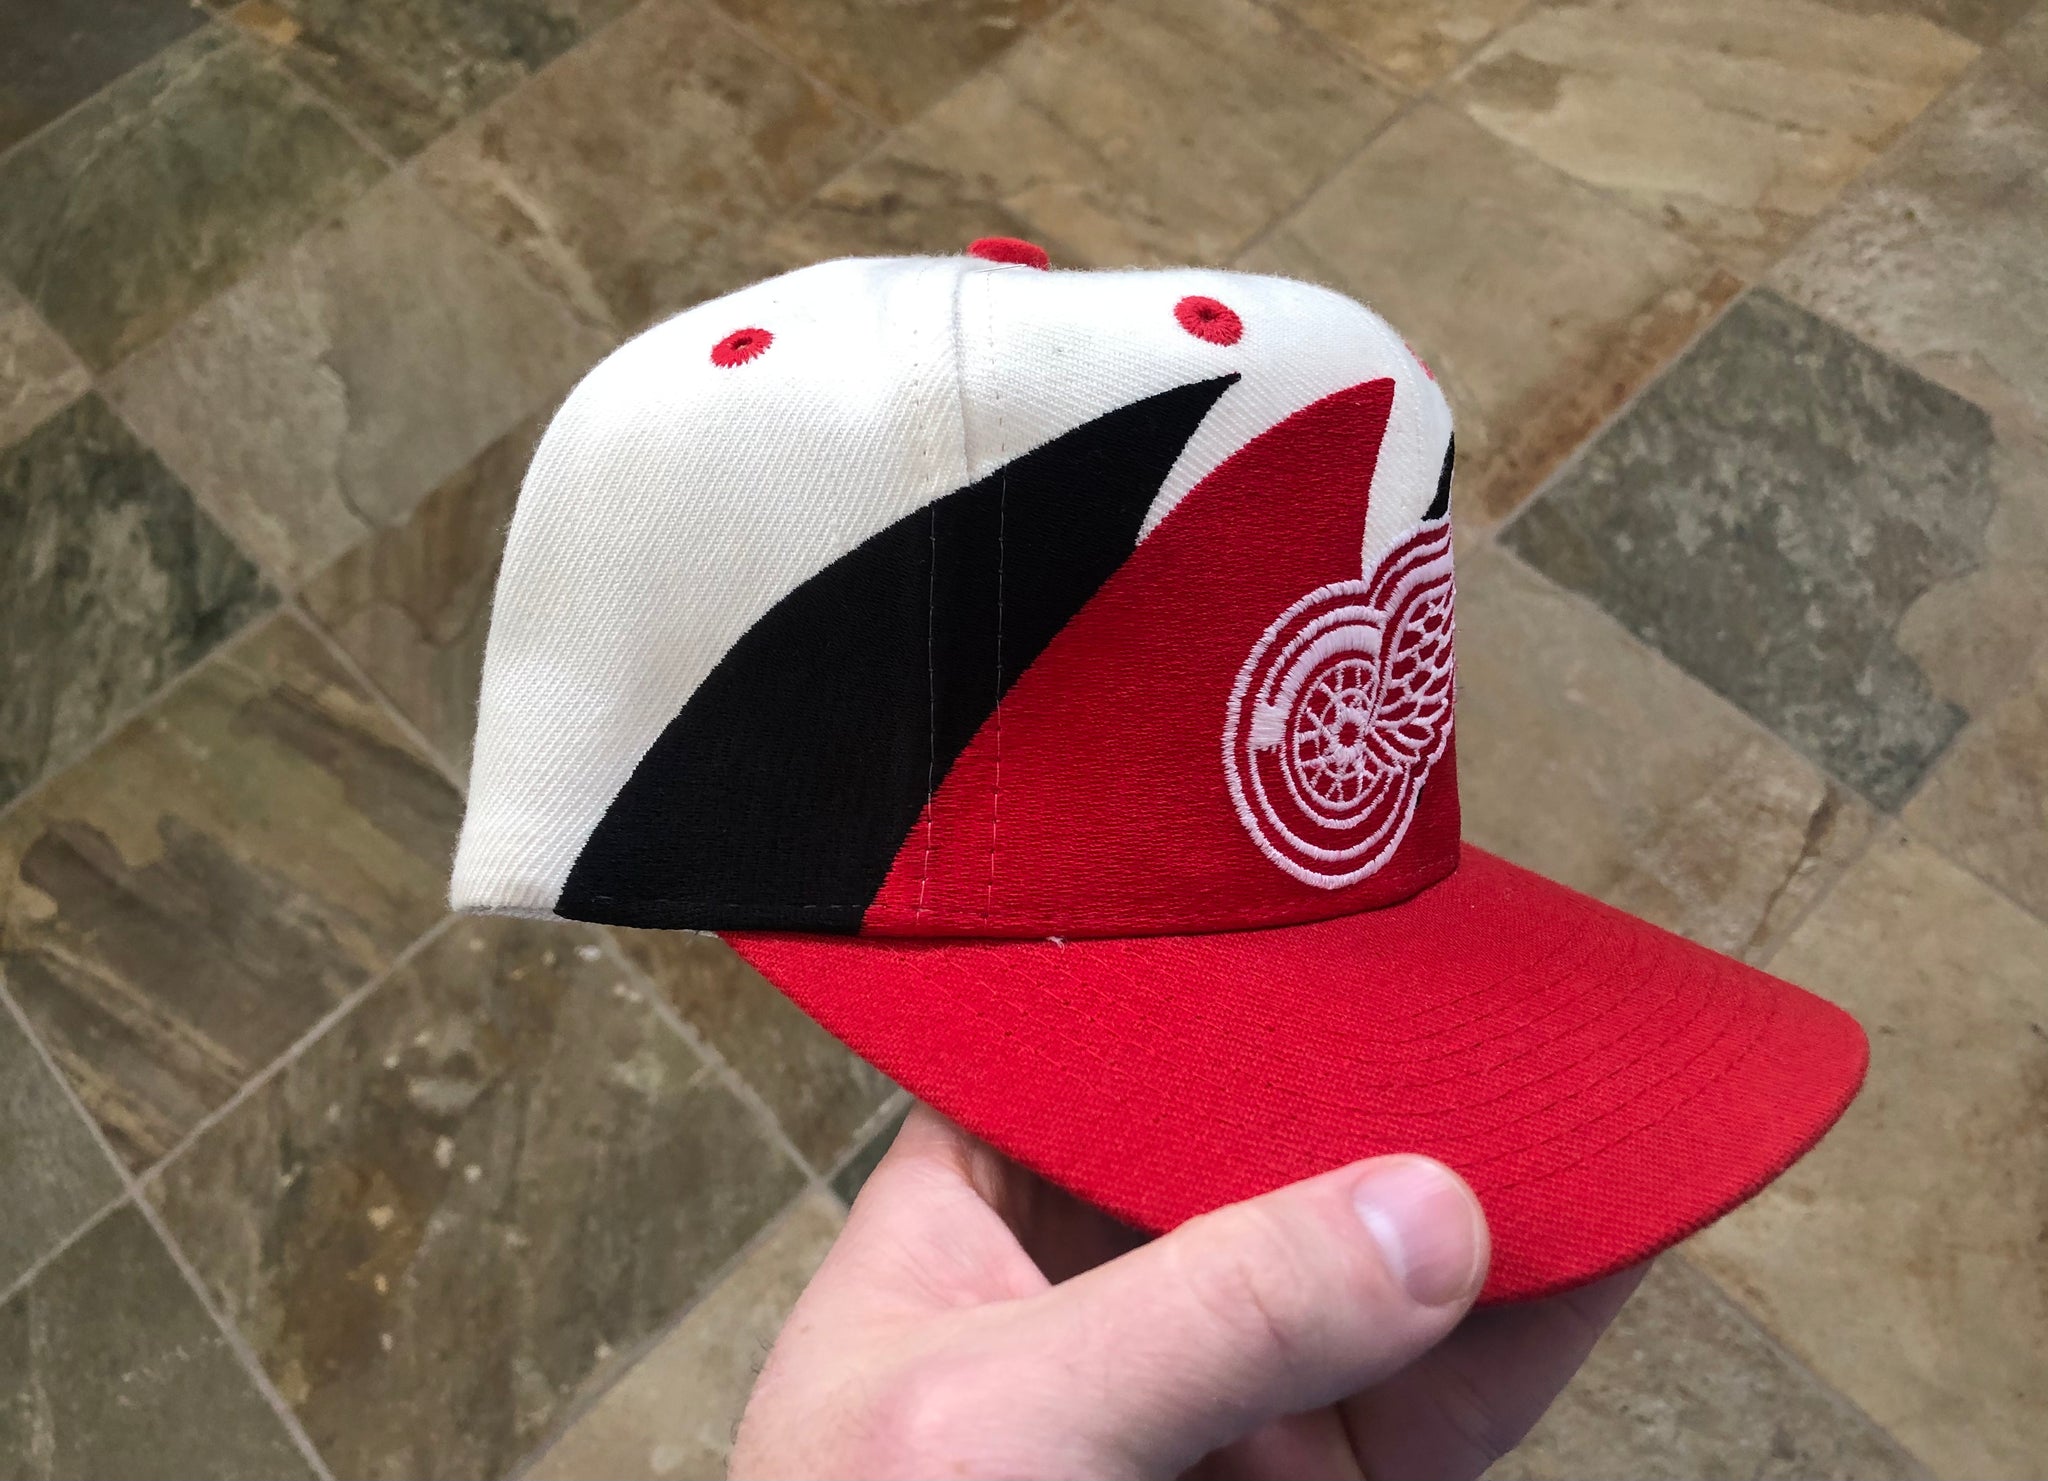 Detroit Red Wings Mitchell & Ness Vintage Sharktooth Snapback Hat - White/ Red